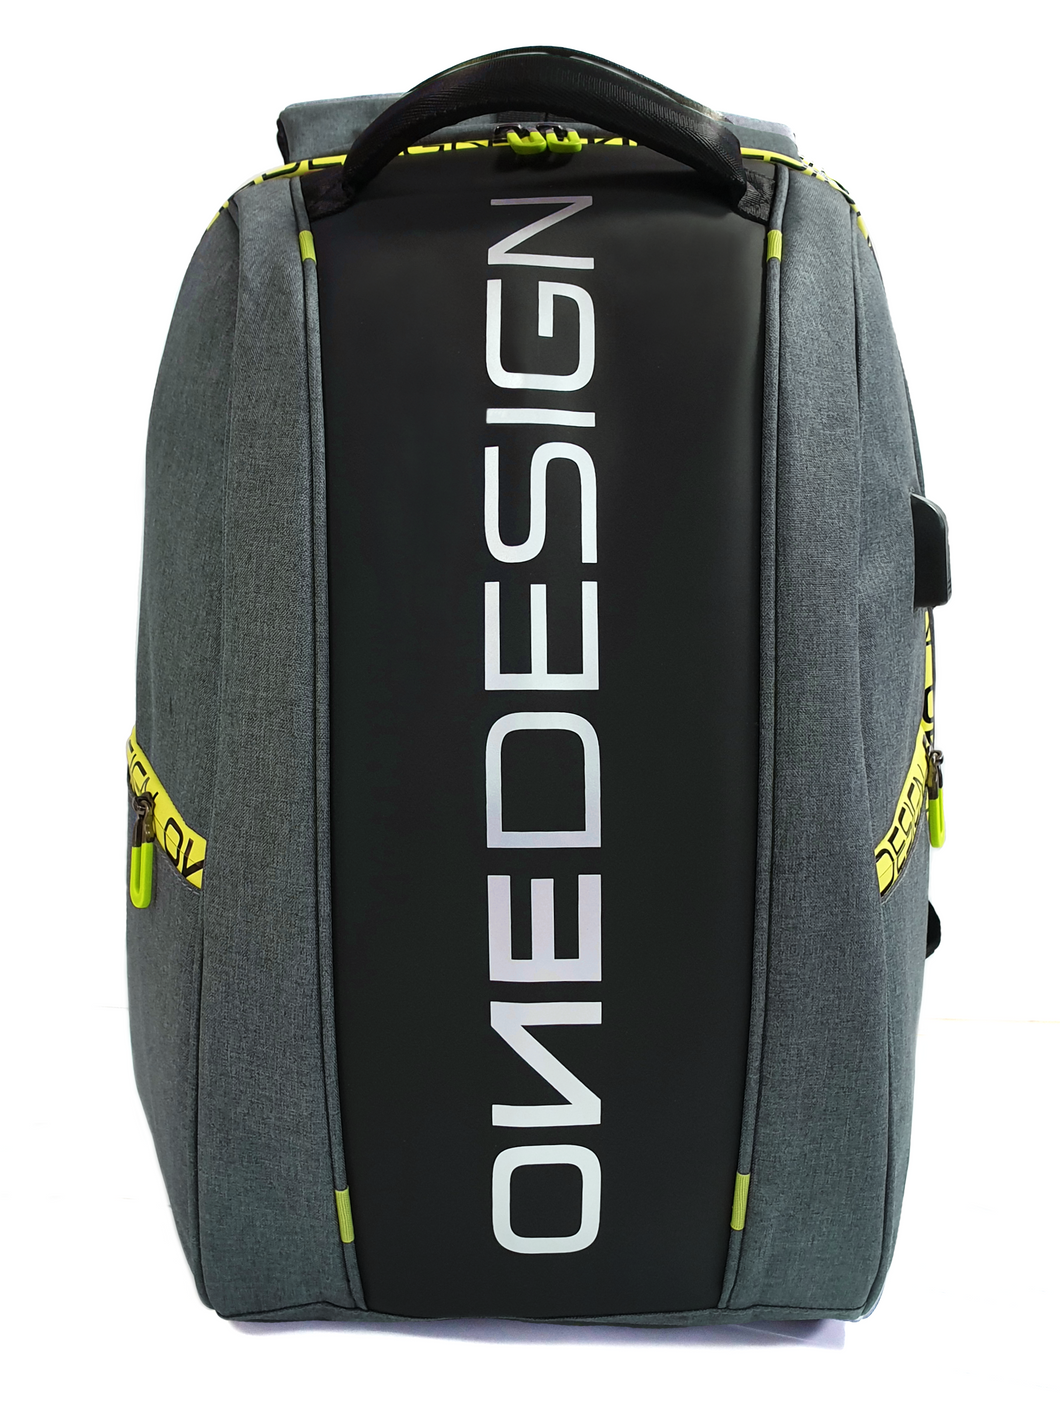 ONEDESIGN WATHER PROOF BACKPACK - Onedesign Corp